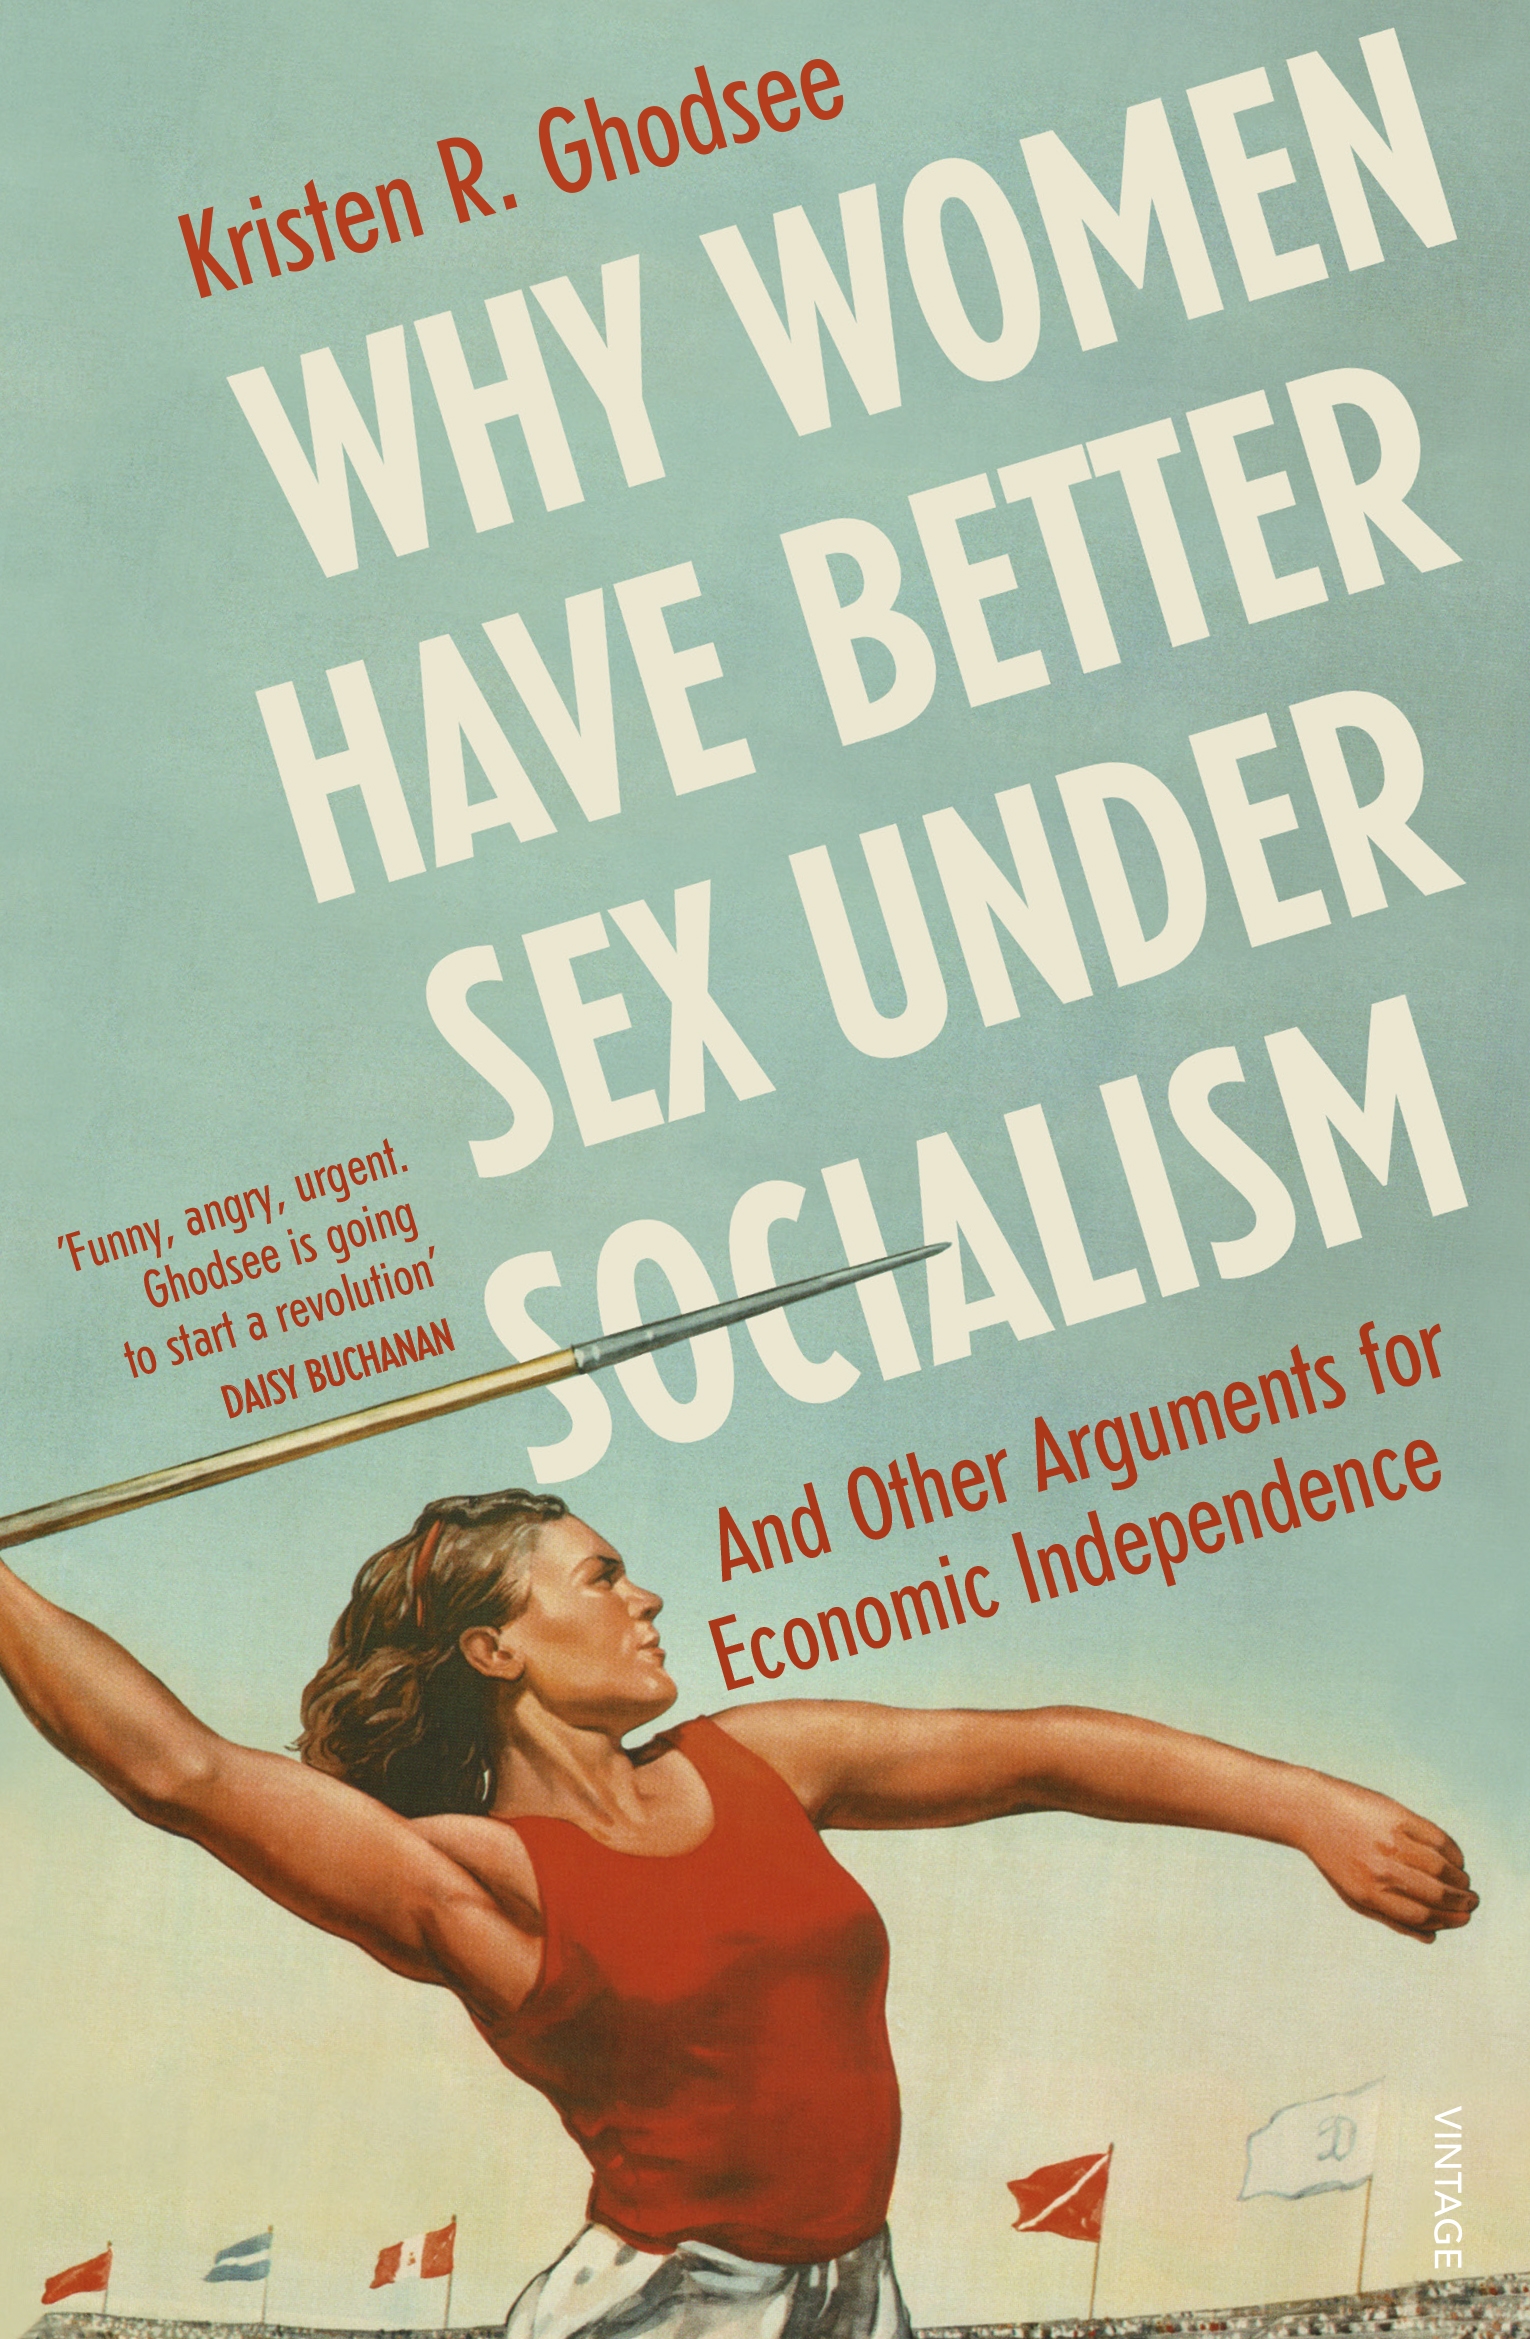 Why Women Have Better Sex Under Socialism By Kristen Ghodsee Penguin Books New Zealand